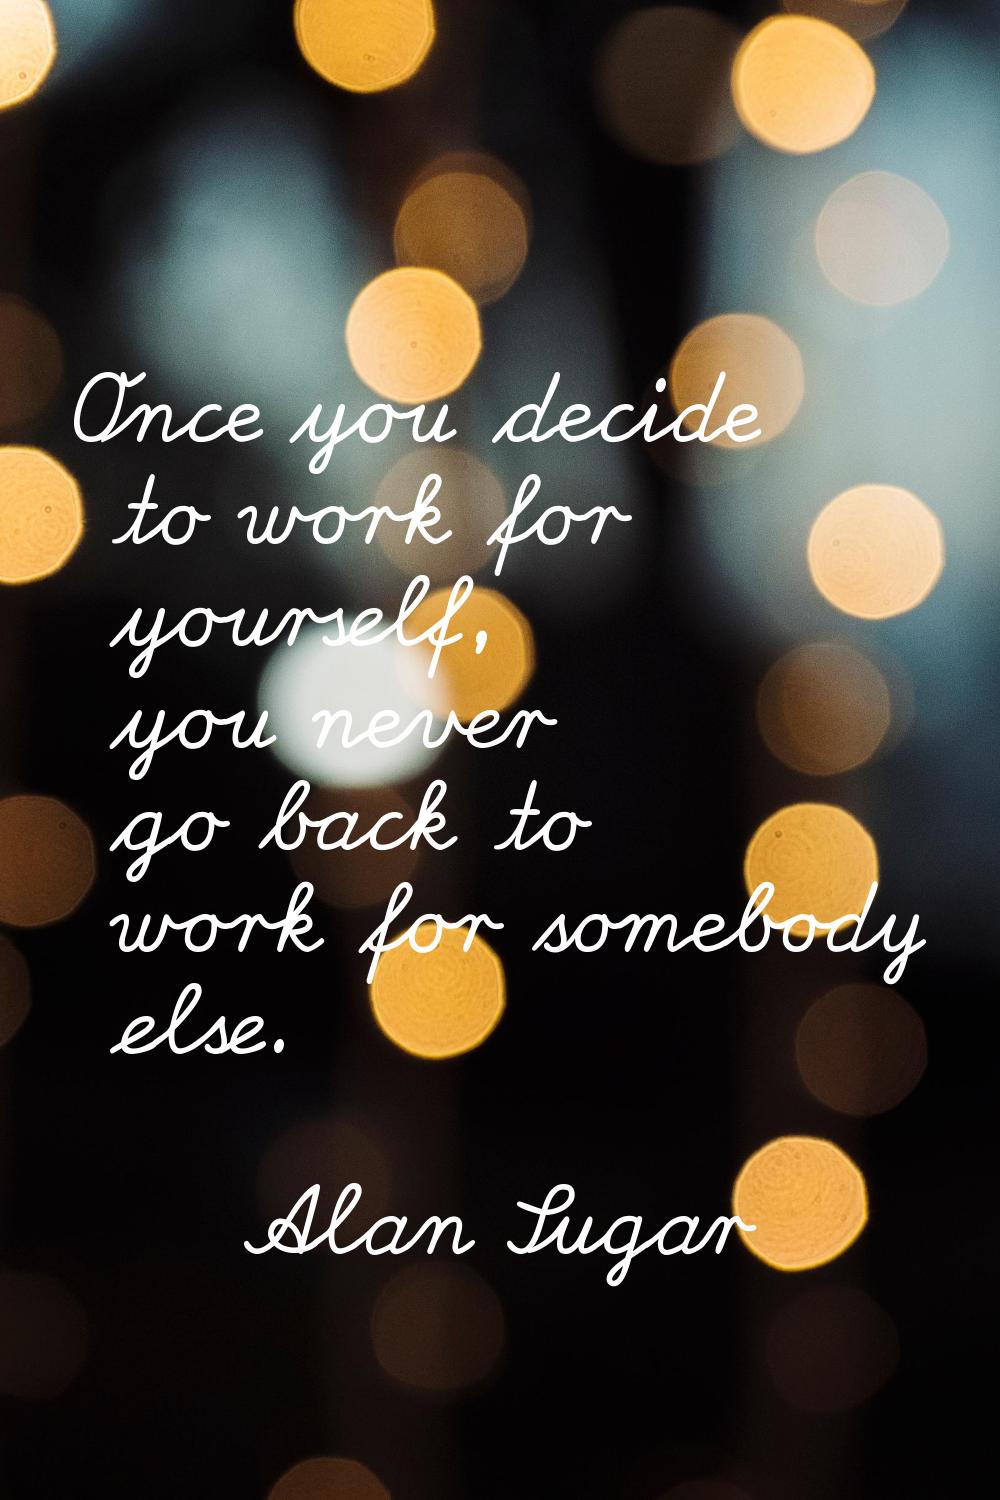 Once you decide to work for yourself, you never go back to work for somebody else.